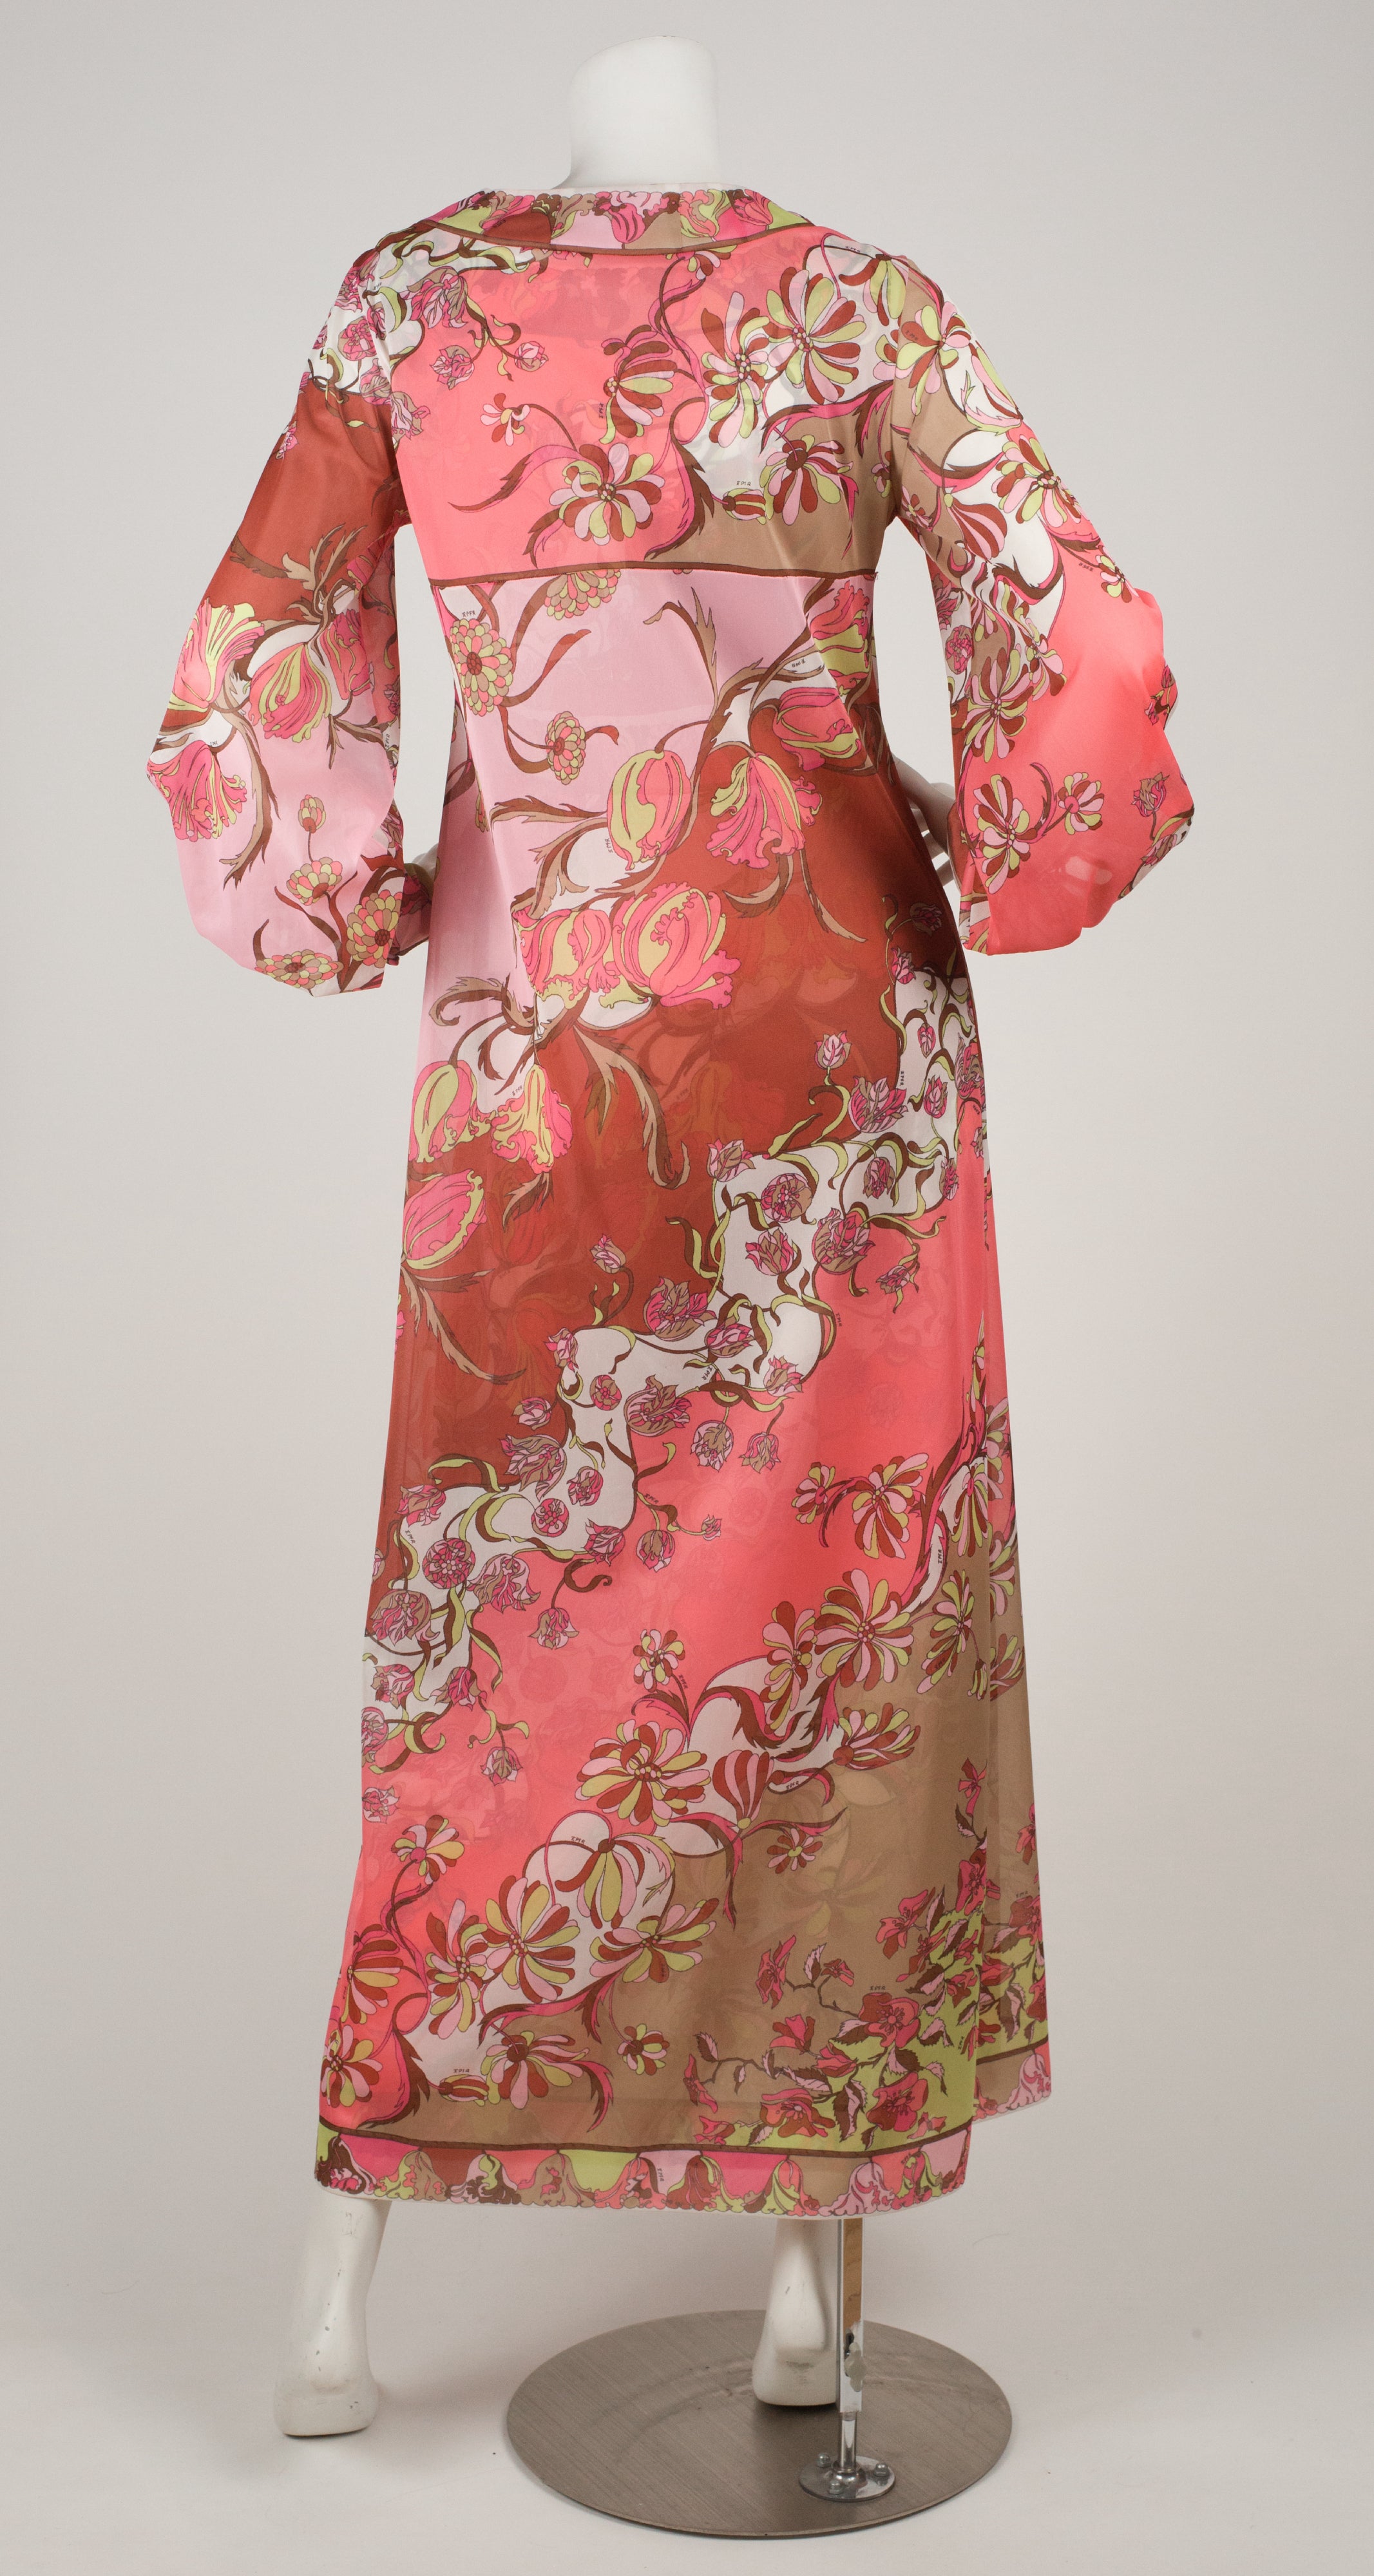 Dressed for Bed: Emilio Pucci for Formfit Rogers, 1959-1970's. This  collaboration was developed in the United States in hopes of expanding the  brand overseas, which proved successful. Many of these pieces can